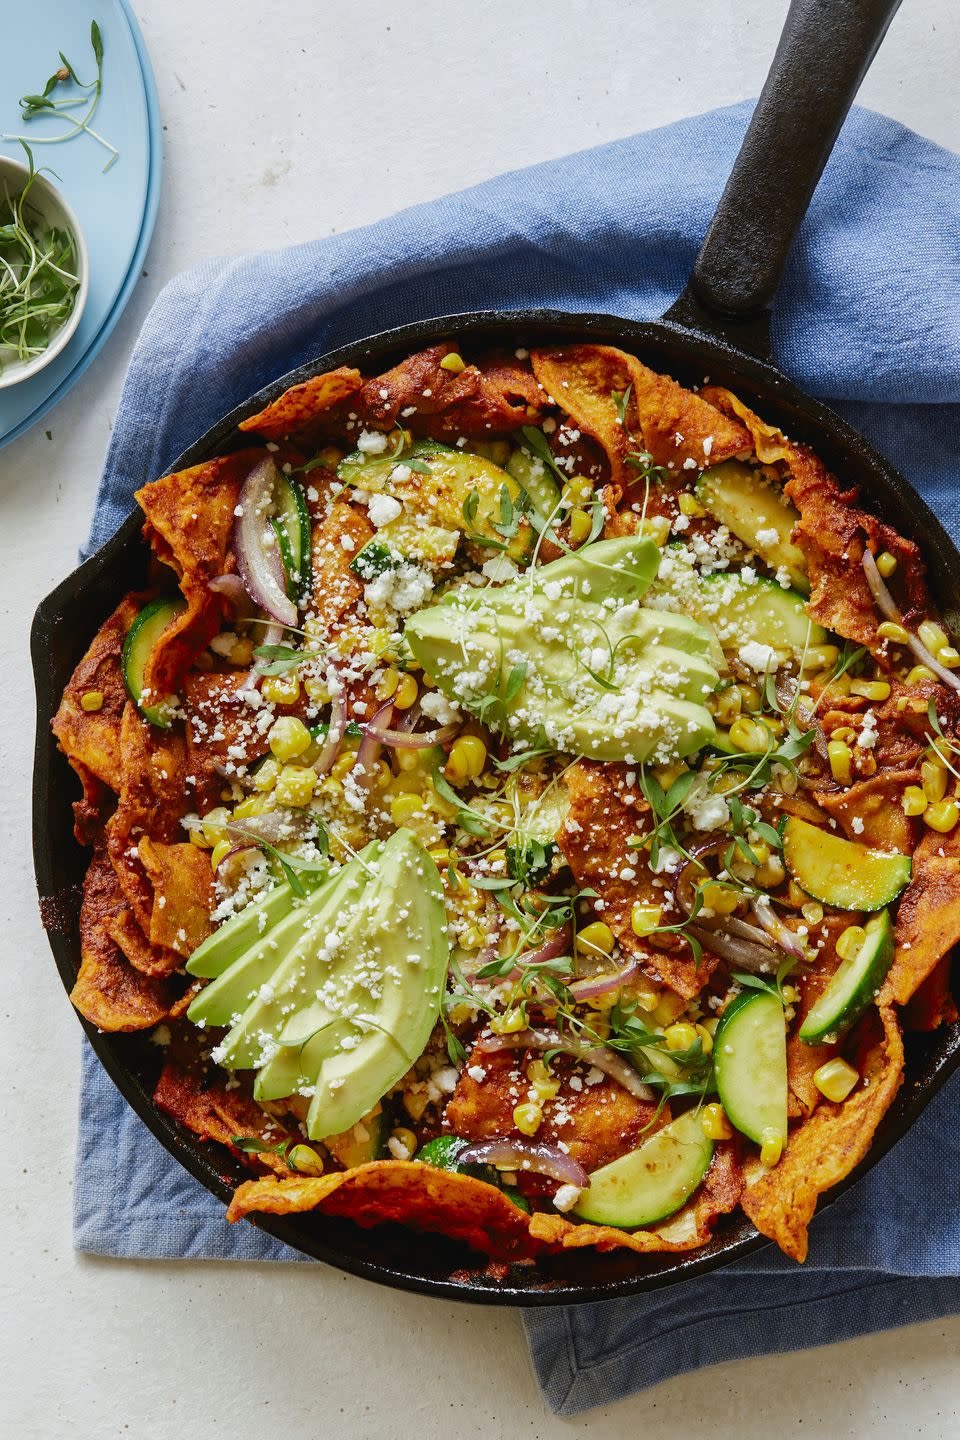 Chipotle-Lime Chilaquiles